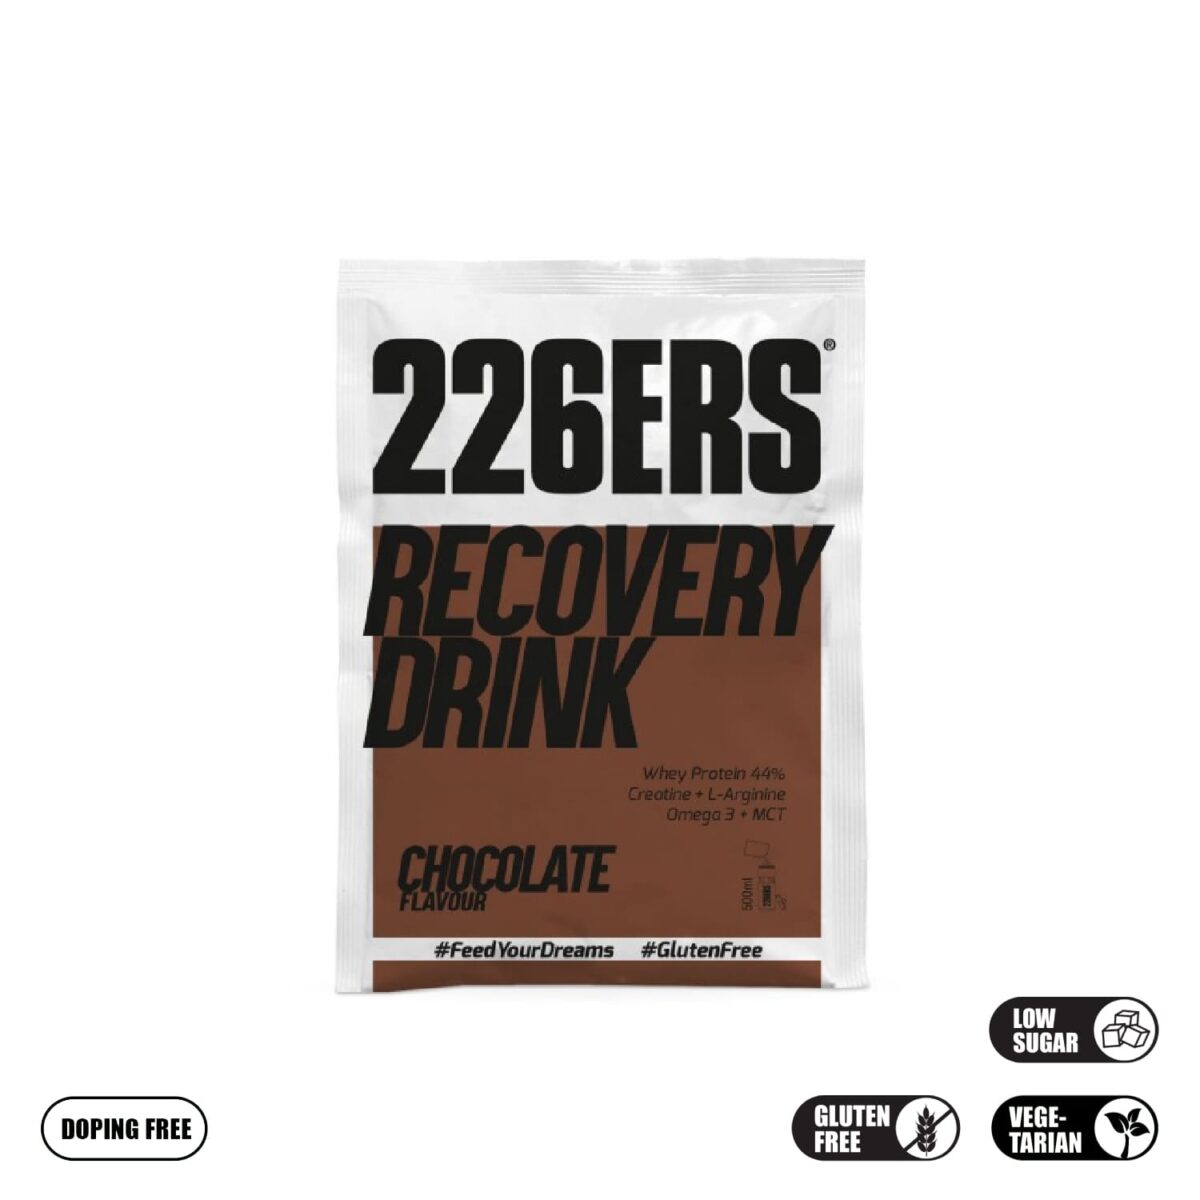 226ers_recovery drink_chocolate